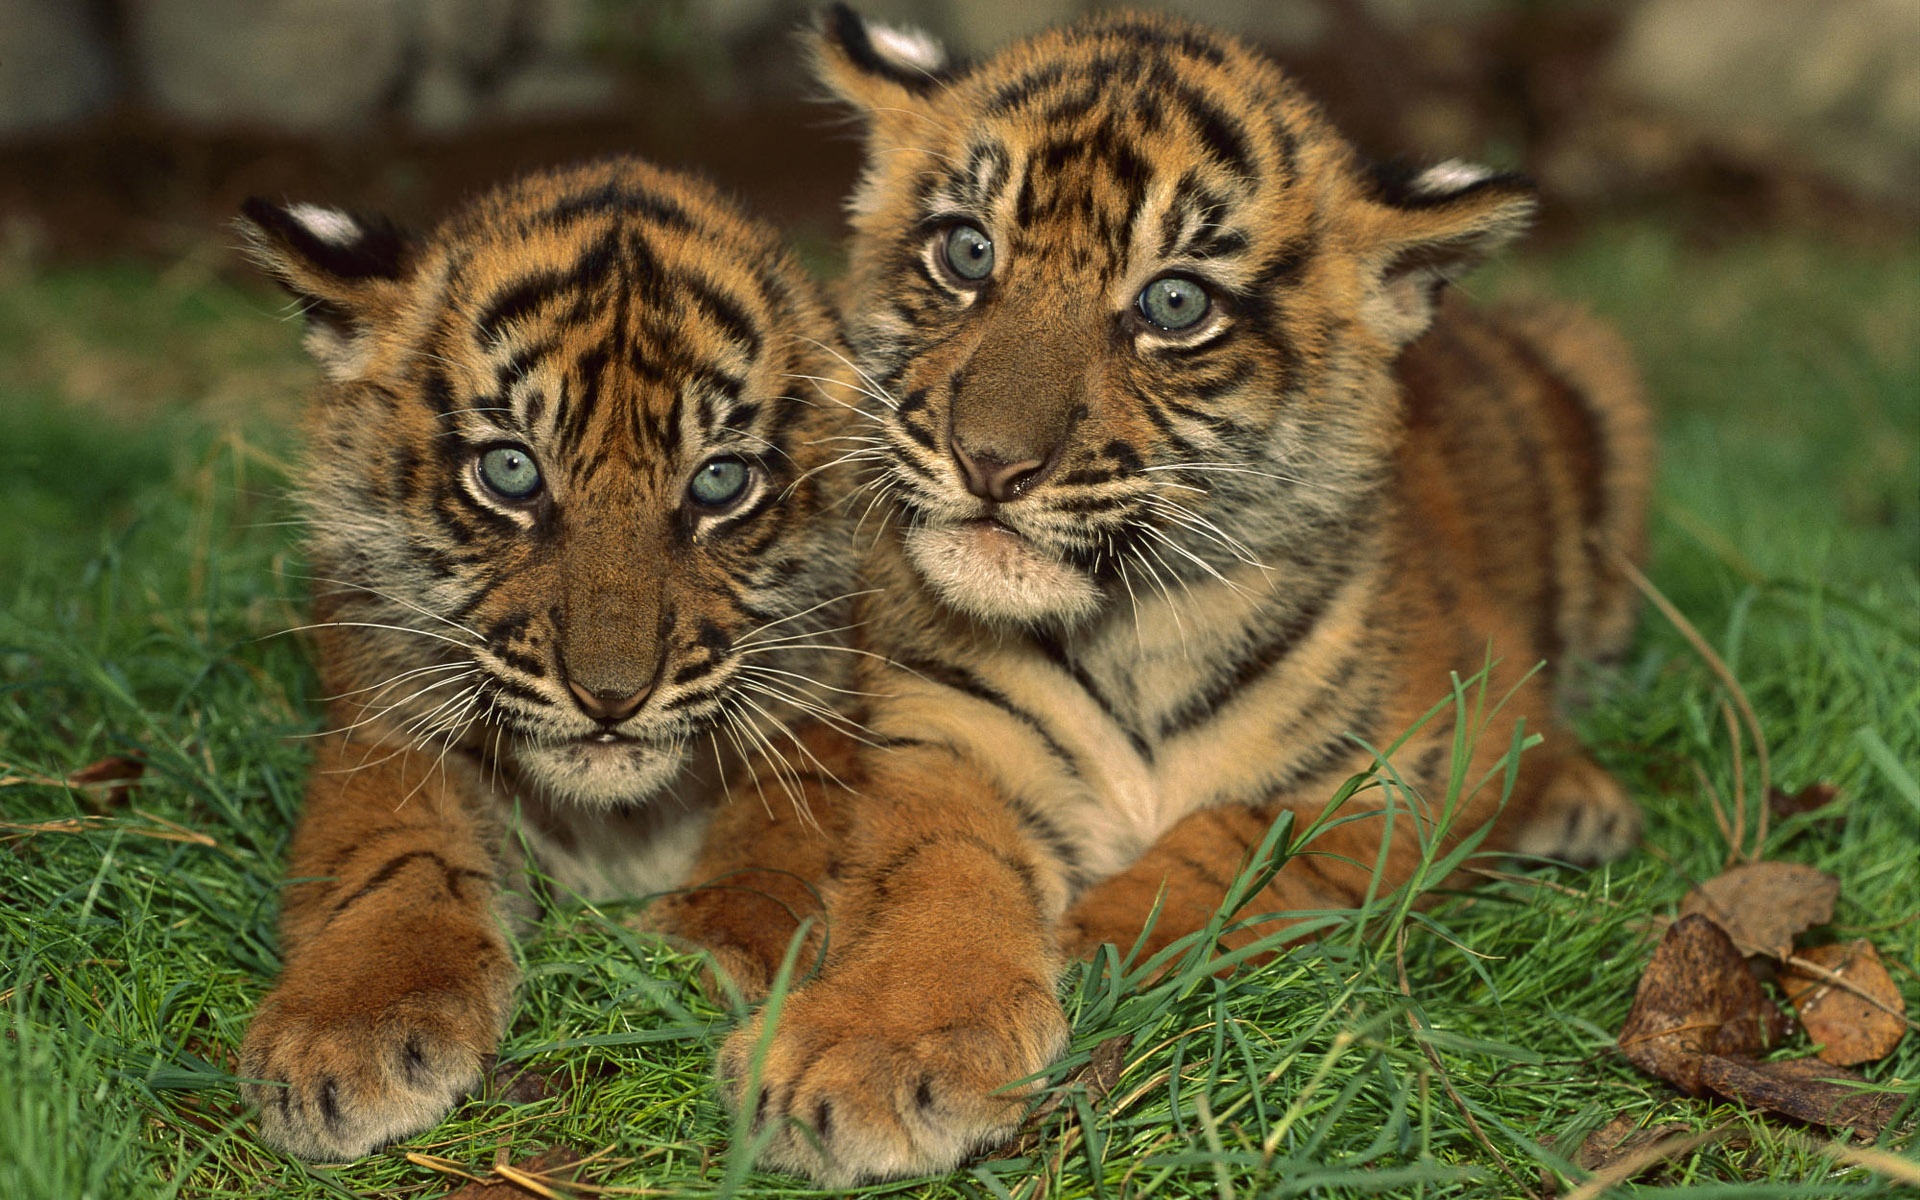  Wallpapers Two little tigers Backgrounds Two little tigers Free HD